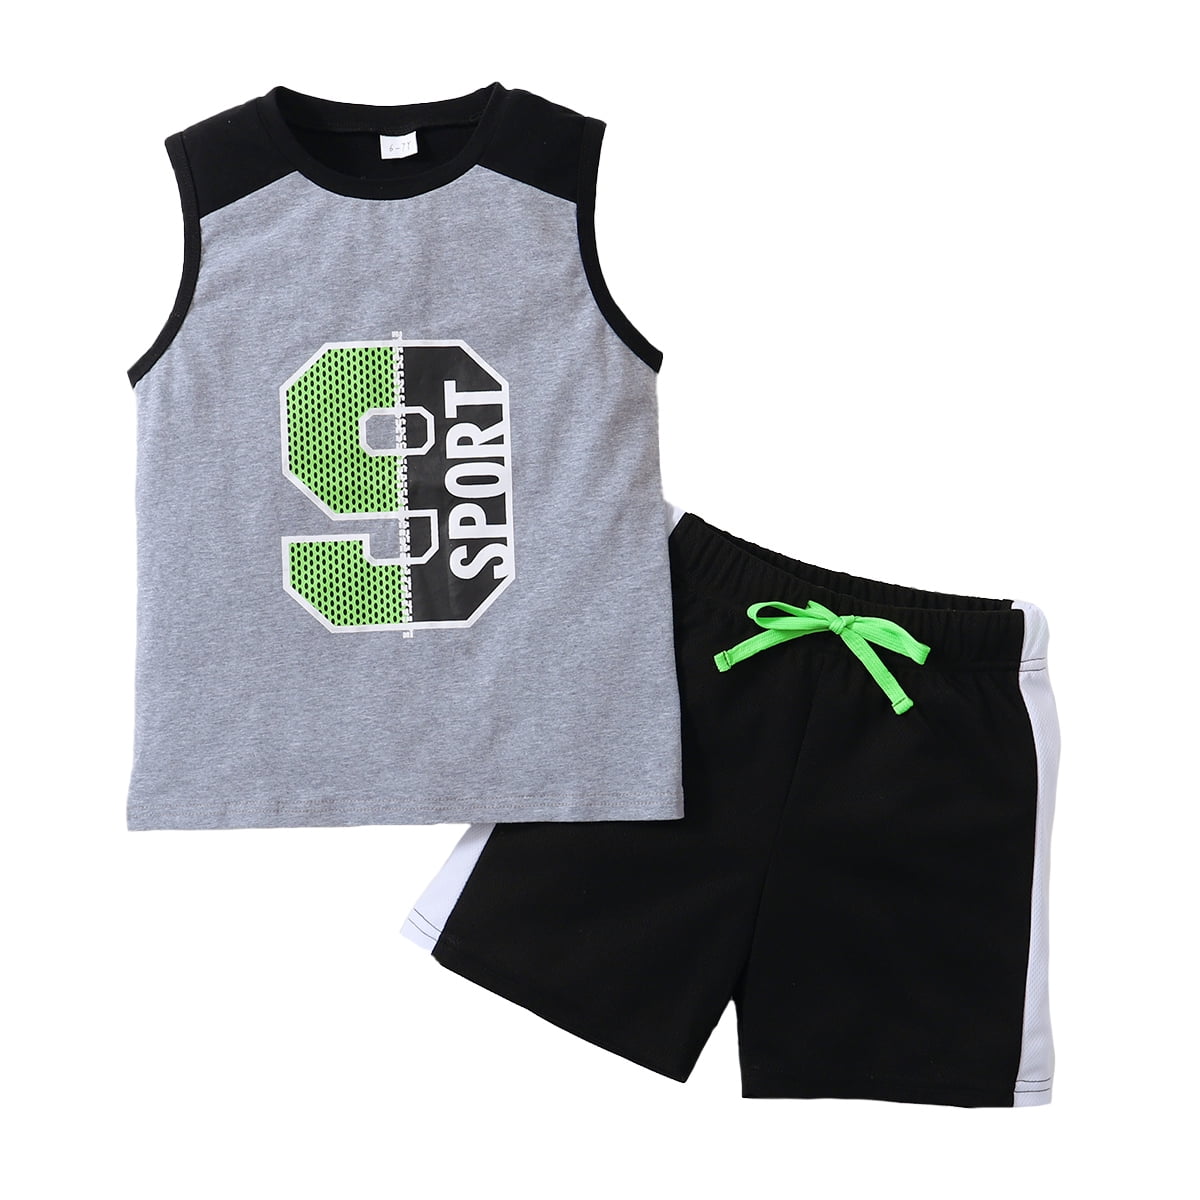 2PCS Kids Boys Sports Outfits Basketball Clothes Summer Sleeve Jersey Sets